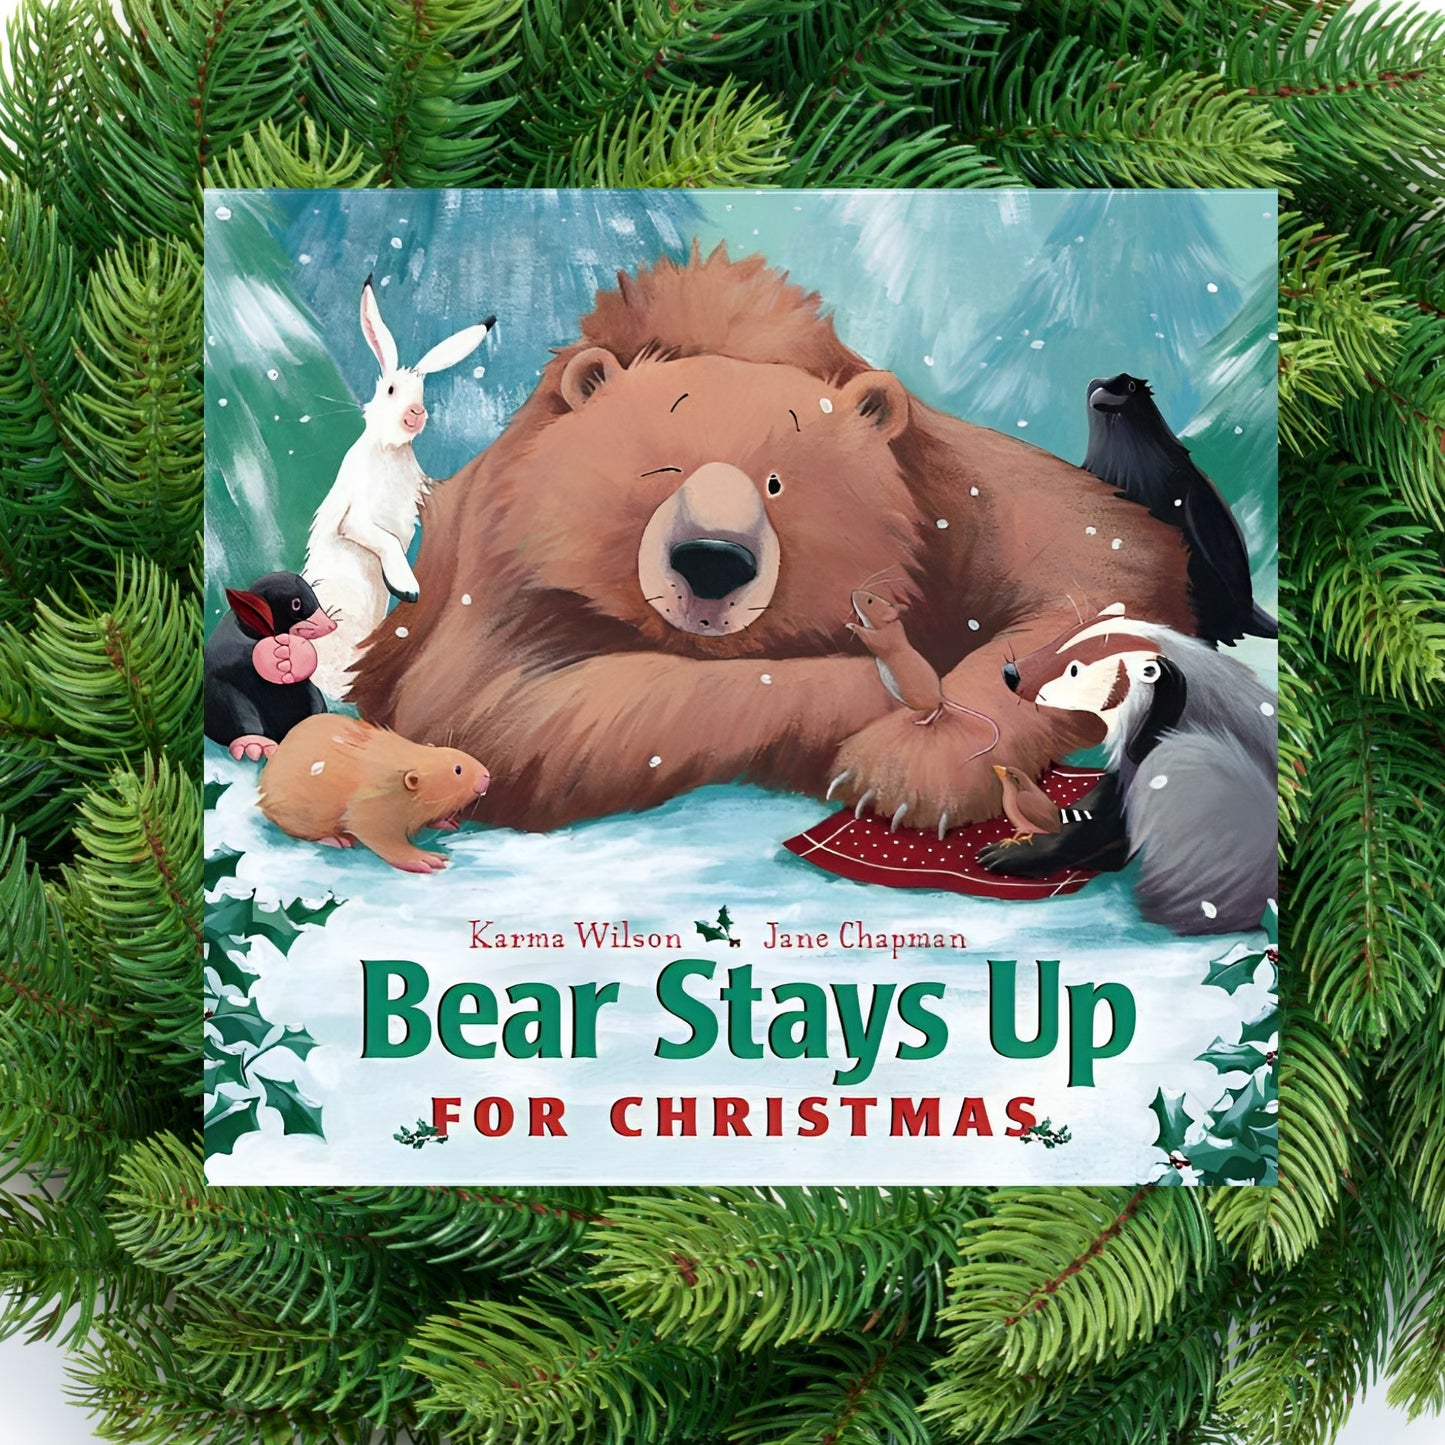 Ivy Kids Holiday Fun Kit featuring Bear Stays Up for Christmas